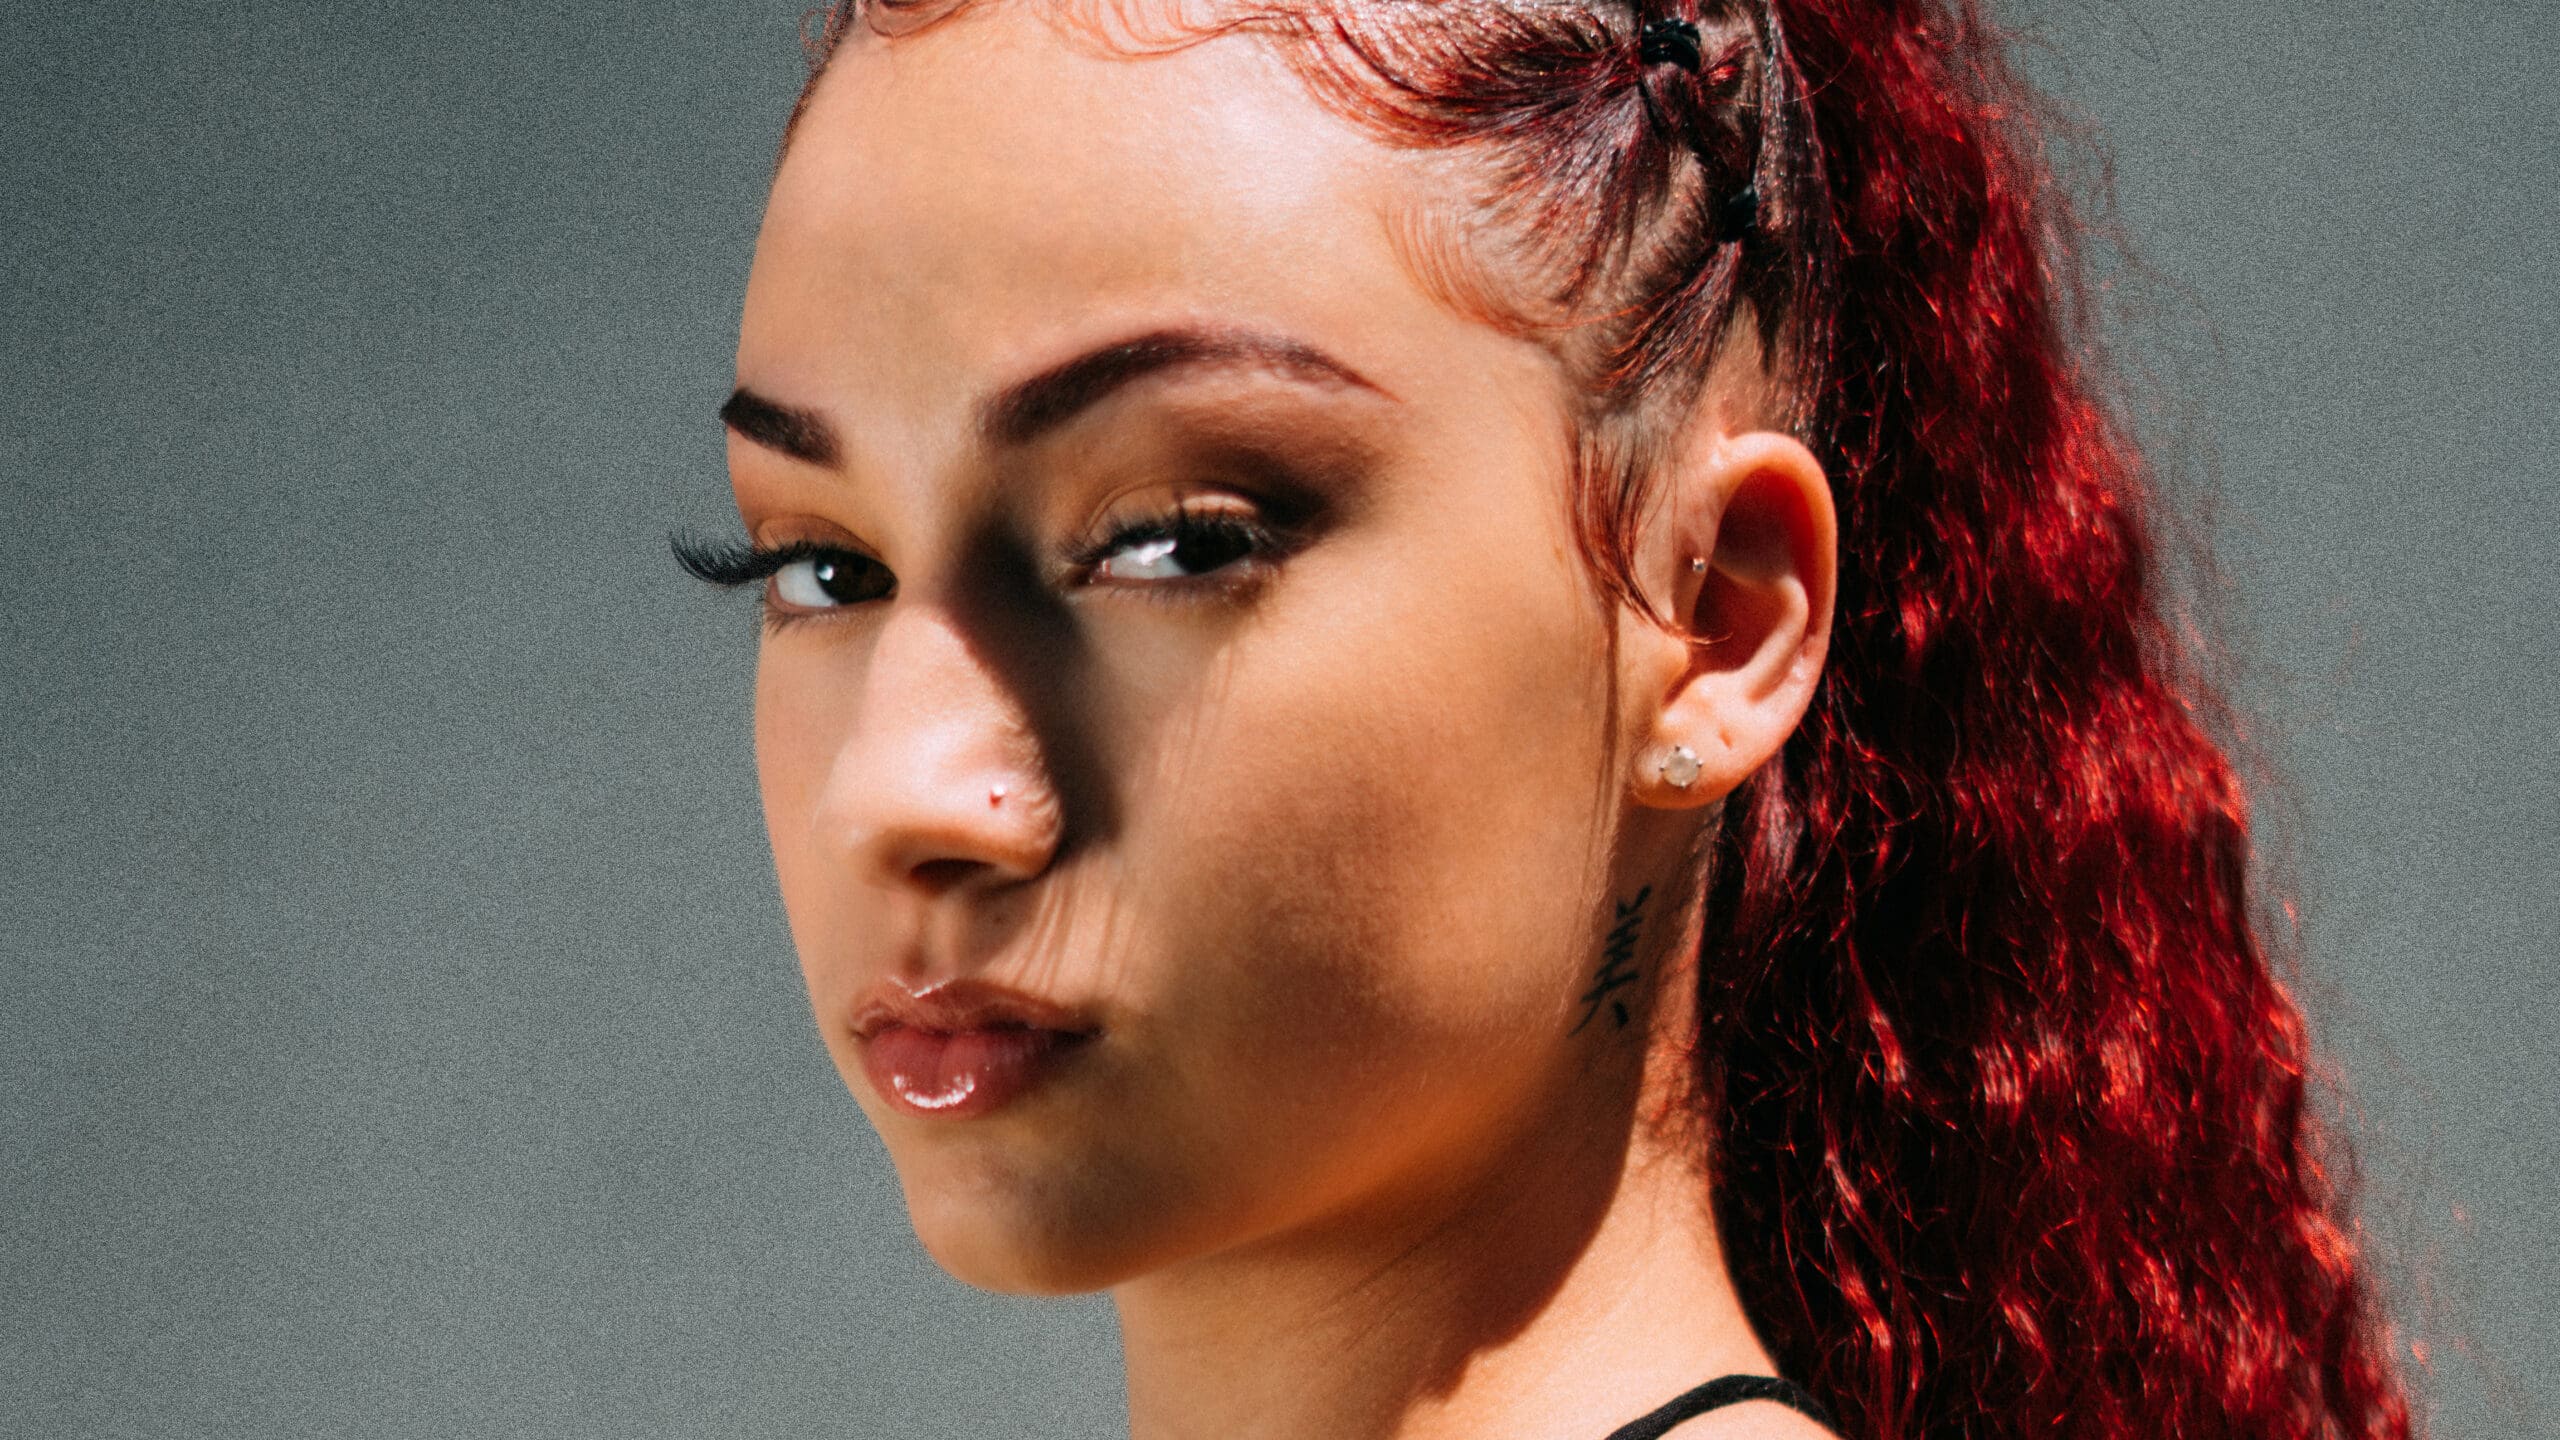 Bhad Bhabie Dissolved Her Fillers, Warns People to Stop Getting Them: It Makes You Look ‘so Much Older’